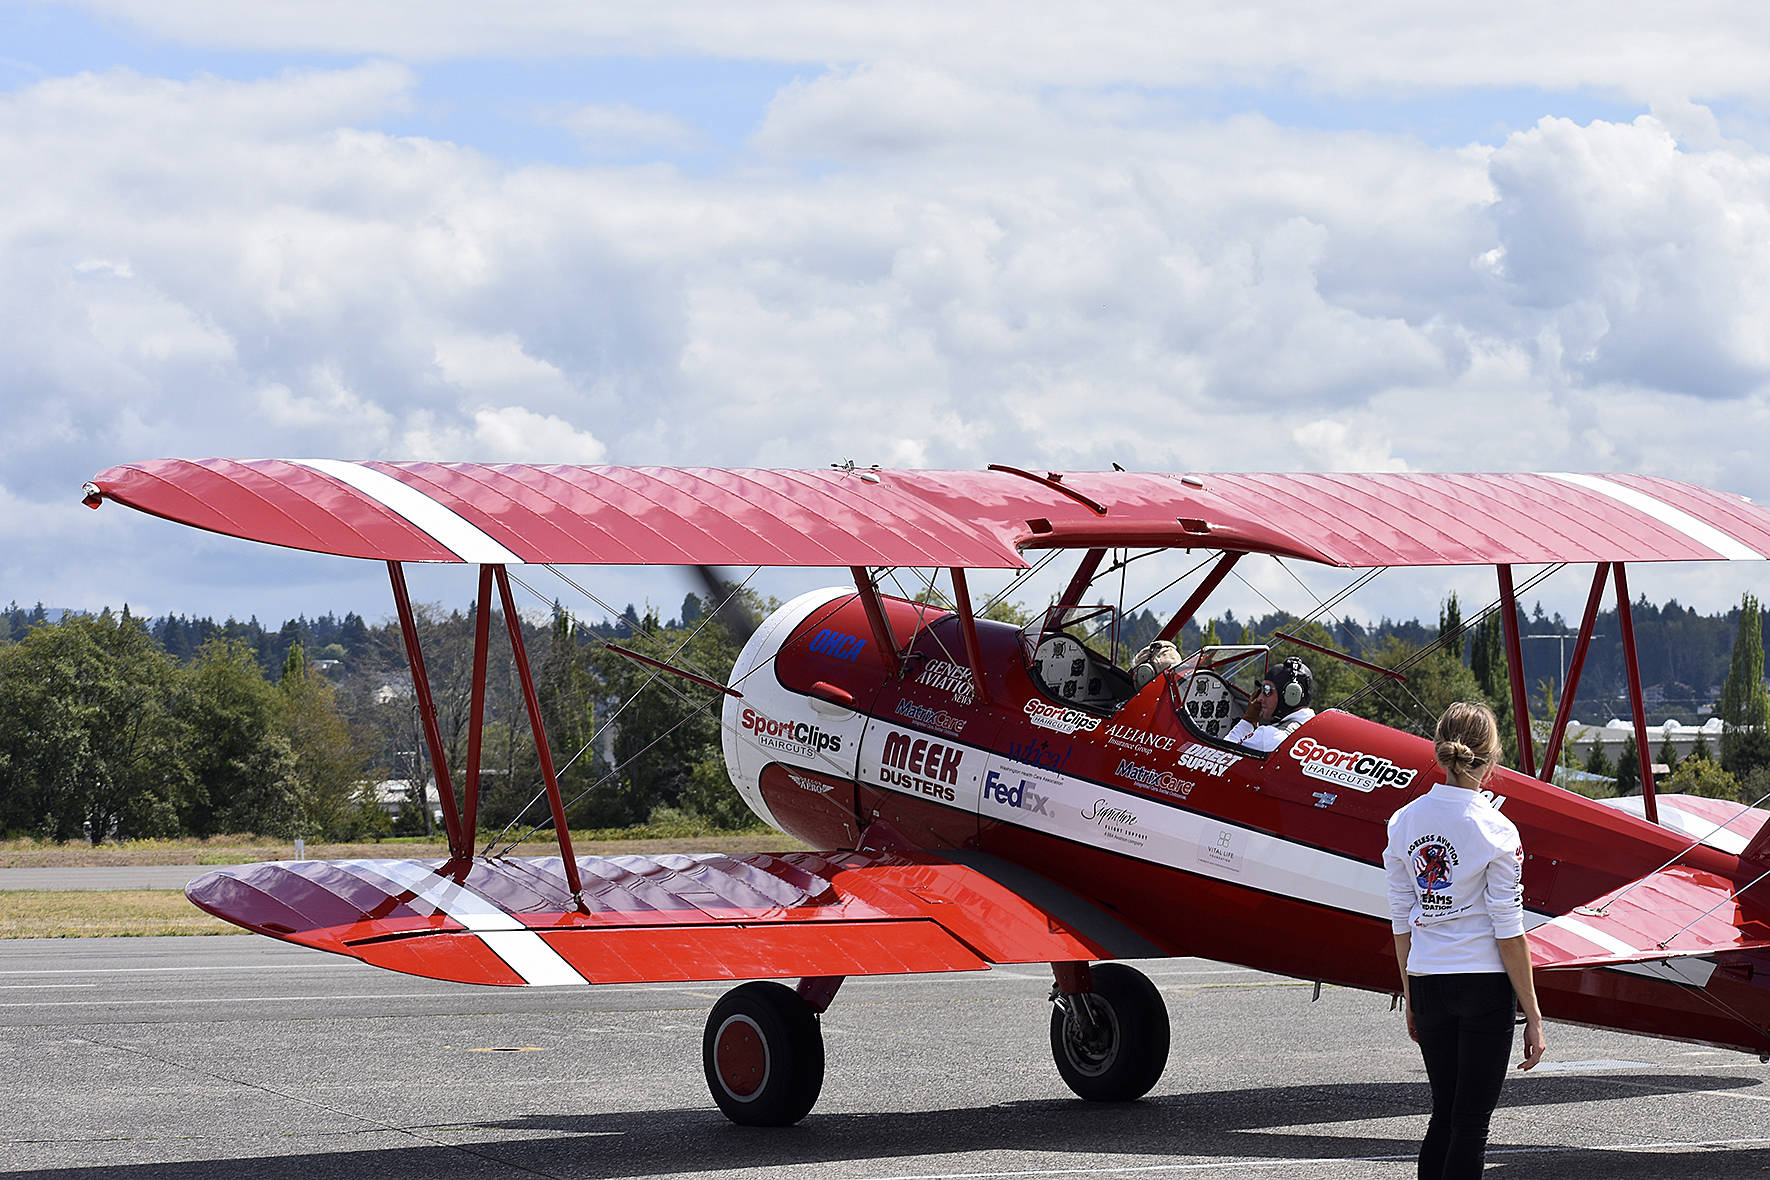 Photos by Haley Ausbun.                                 Seniors in nearby care facilities took flight in a 1942 Boeing Stearman biplane at Renton Municipal Airport, offered by Ageless Aviation Dreams Foundation.